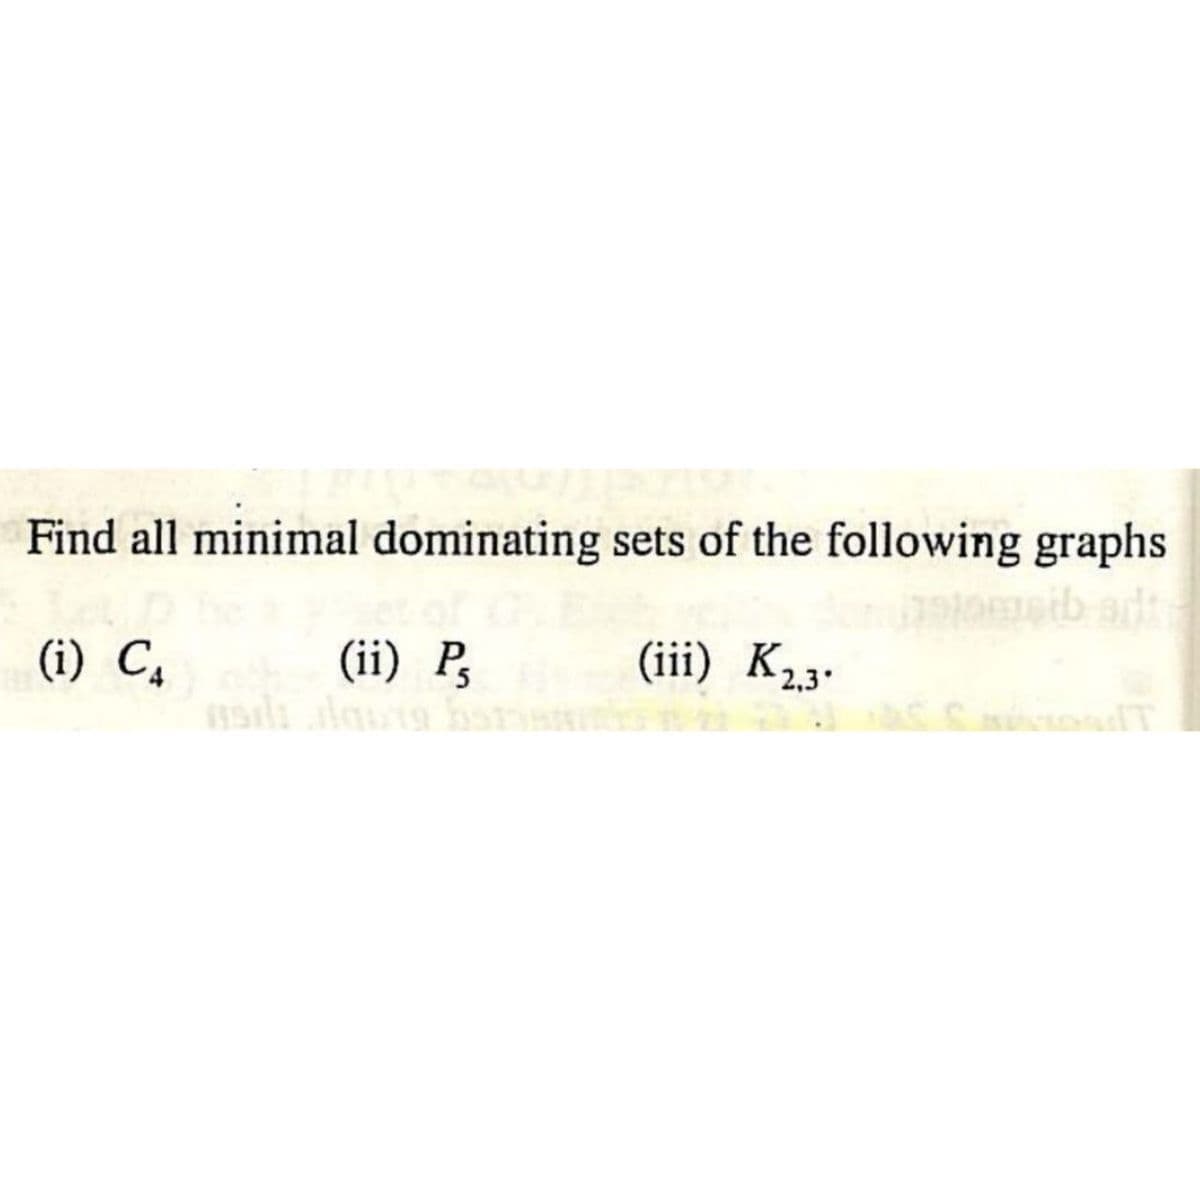 Find all minimal dominating sets of the following graphs
adt
(i) C₁
(iii) K₂.3.
(ii) P